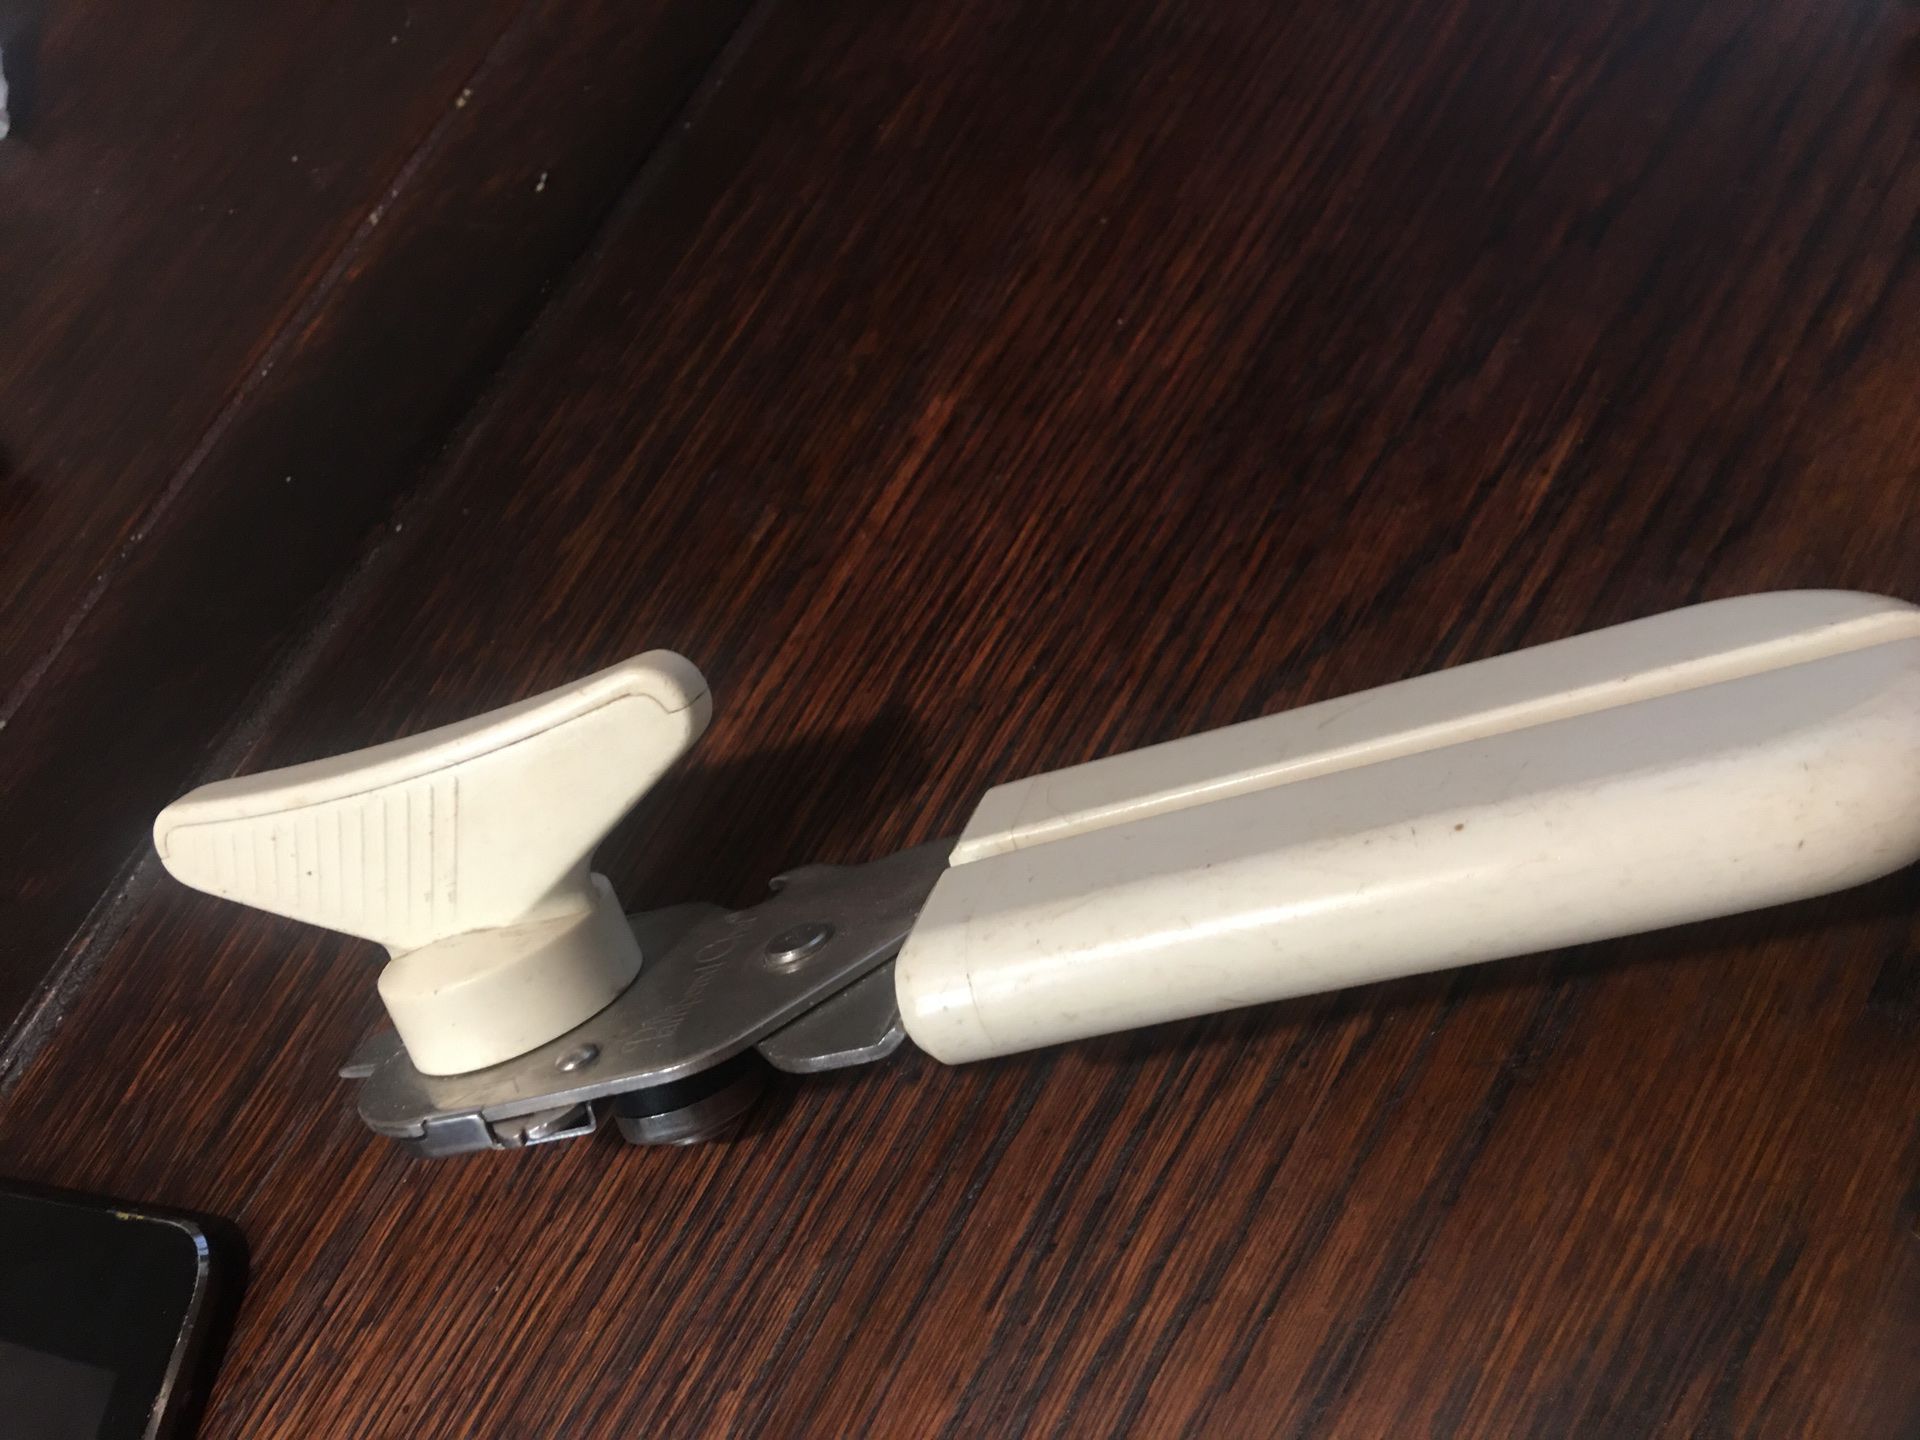 Pampered chef can opener for Sale in Bakersfield, CA - OfferUp